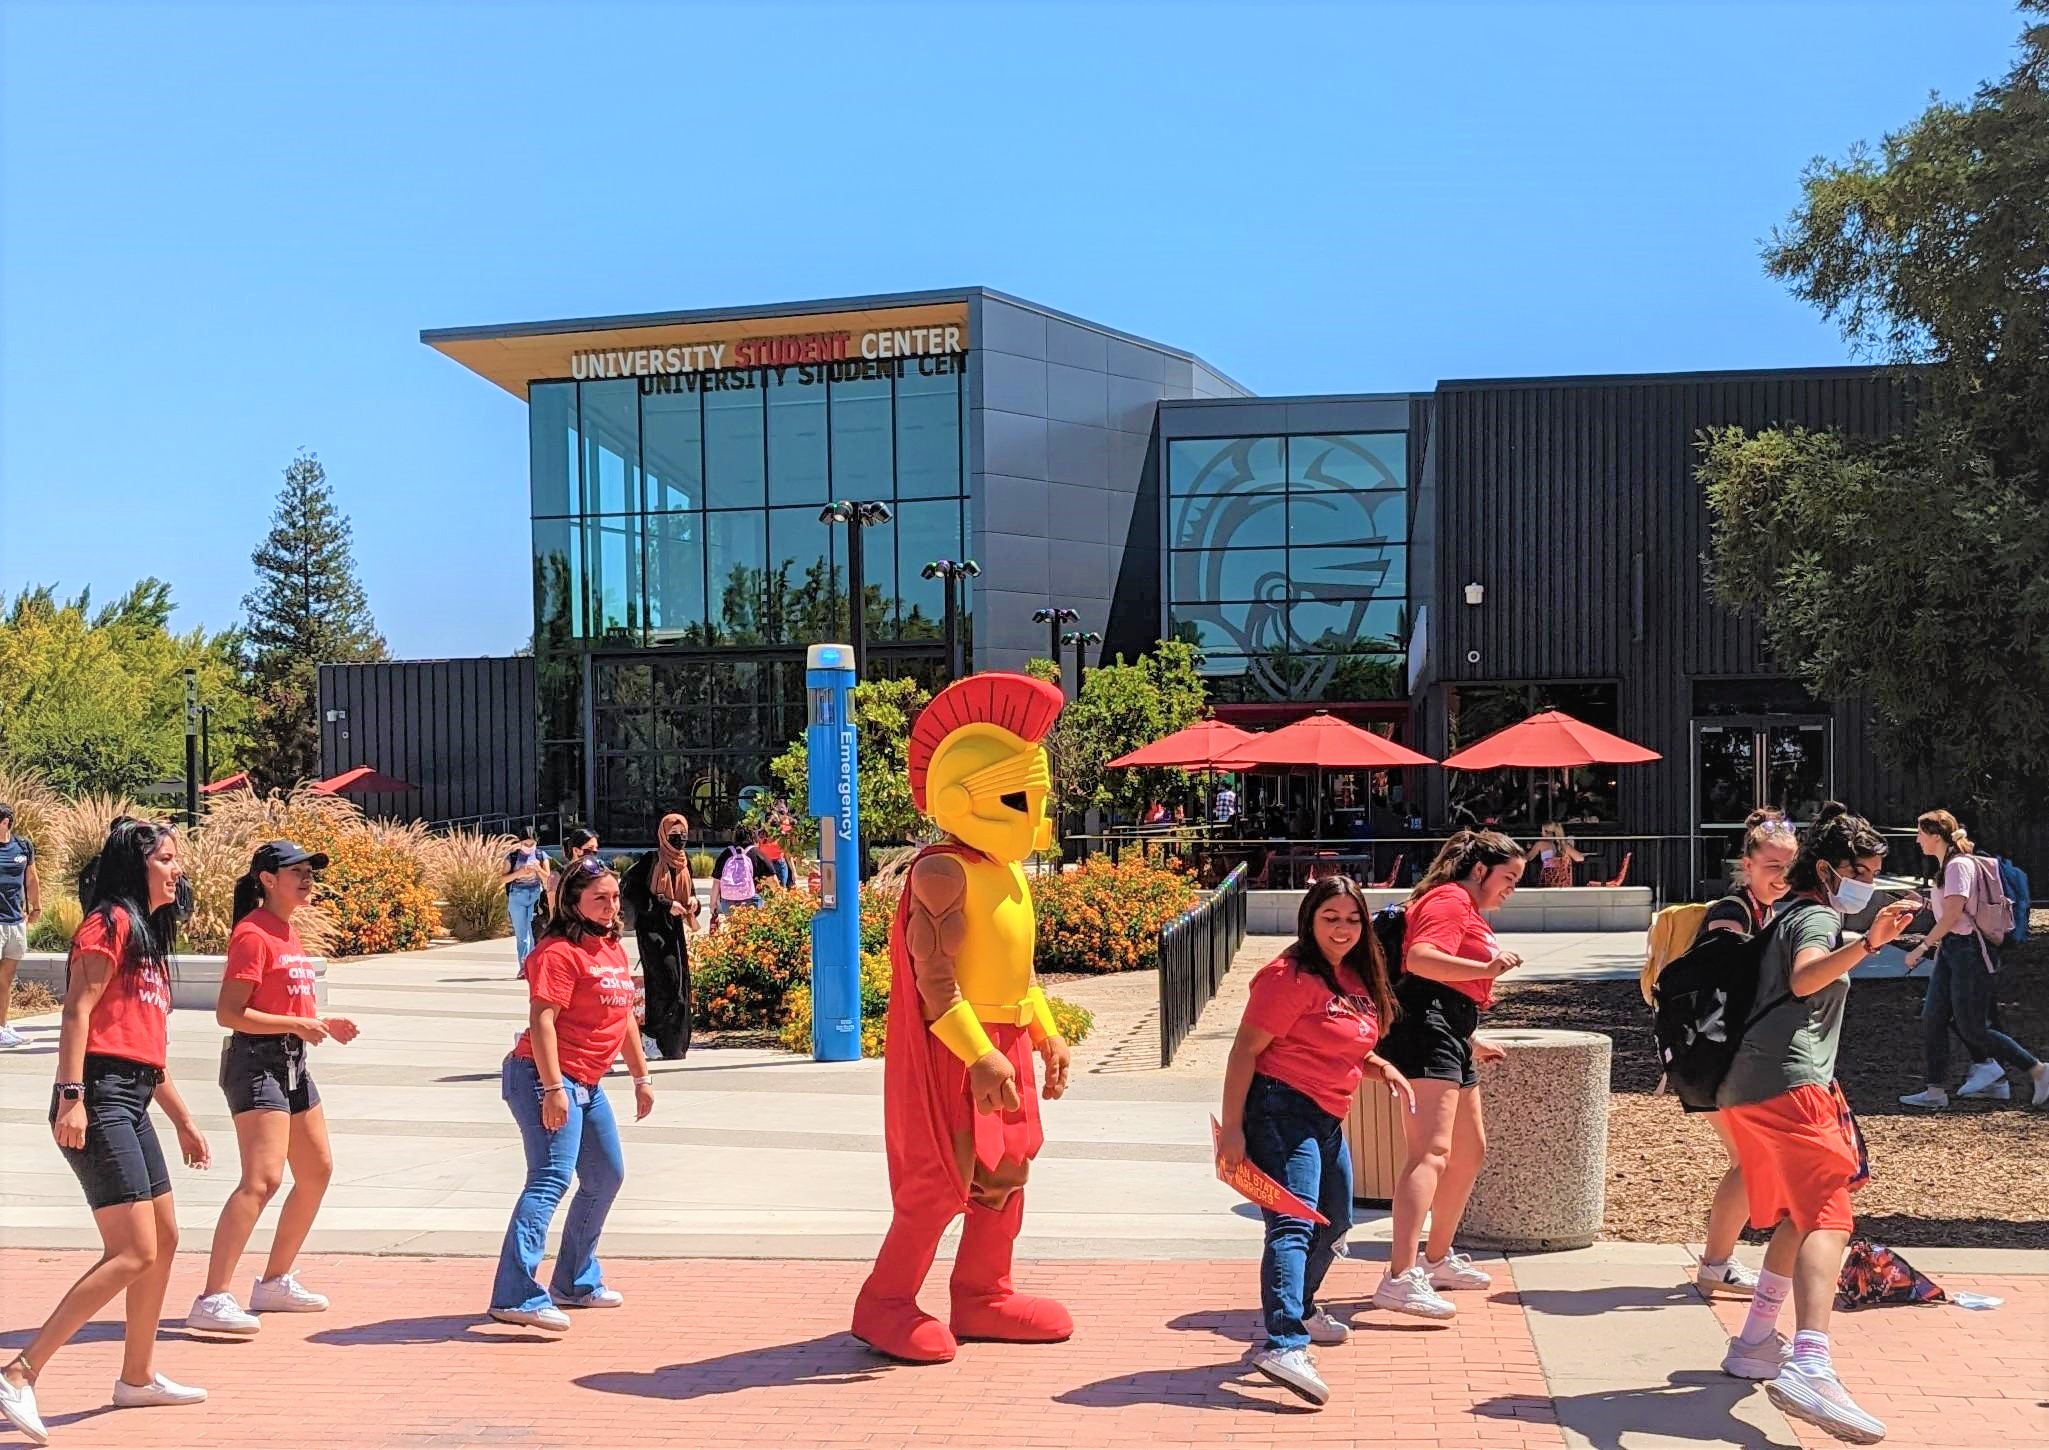 Photo of student center with students lined up to dance and Titus, the campus mascot, in the middle.